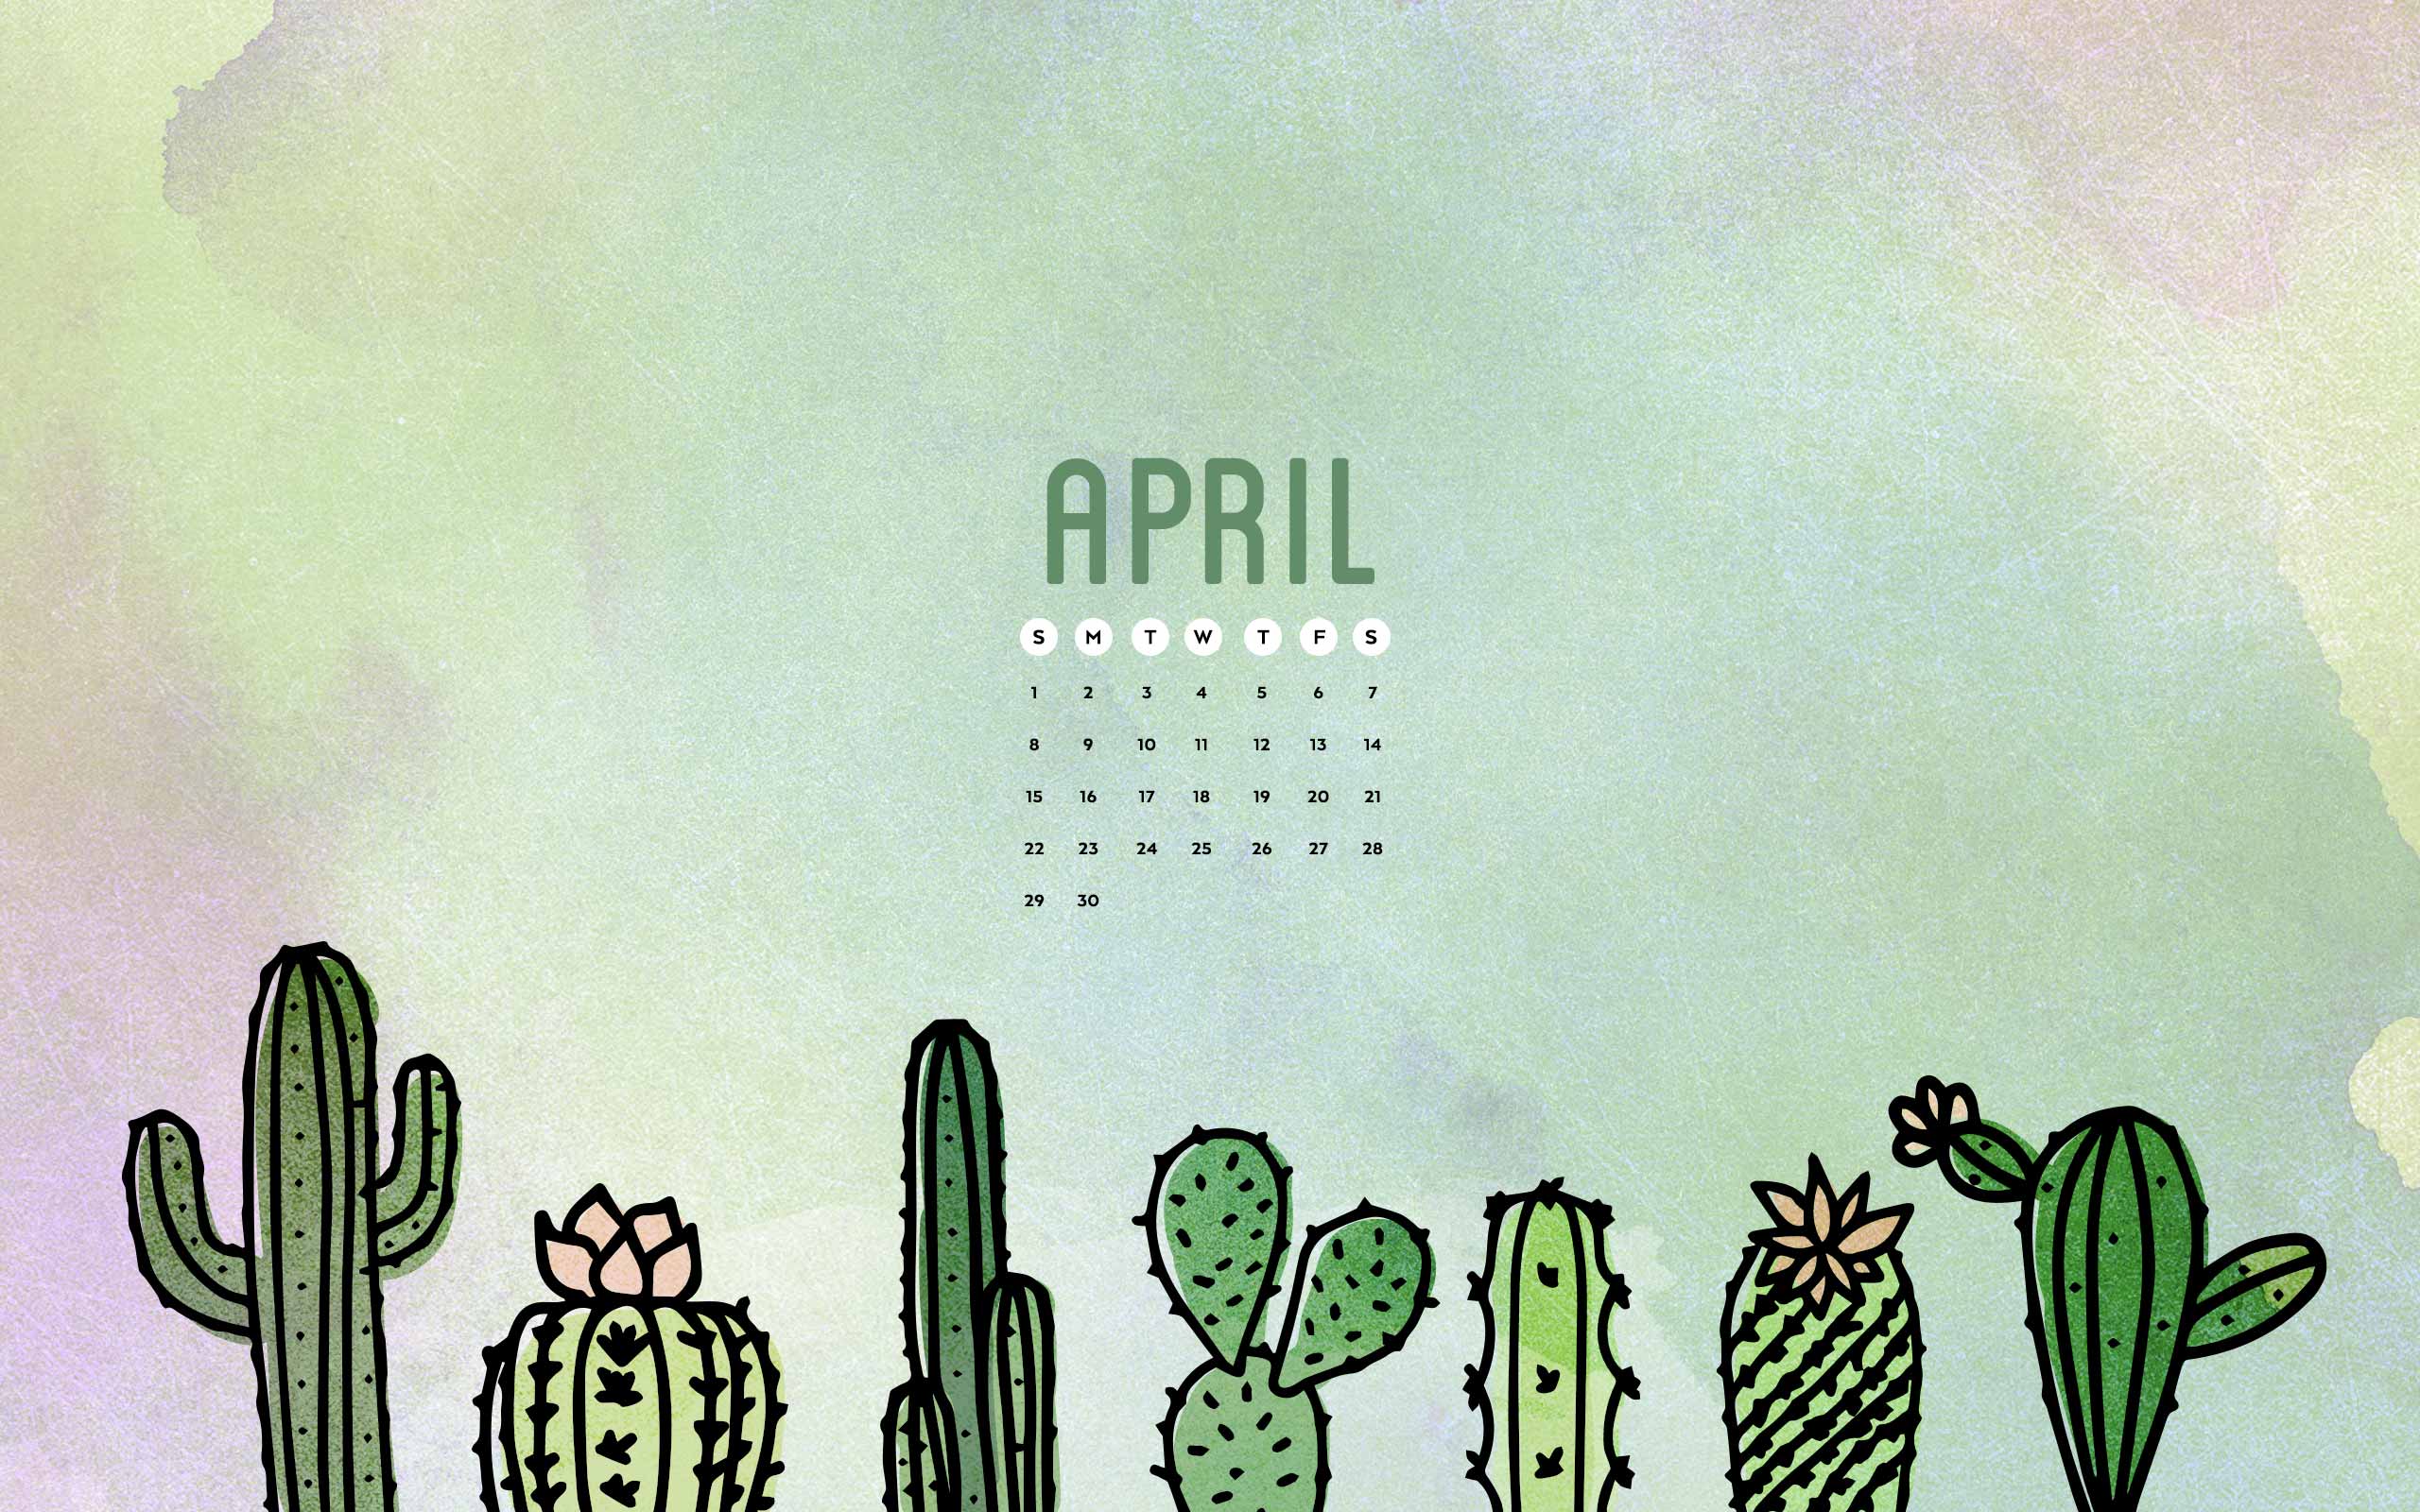 Free Wallpaper For April 2018 - Aesthetic Backgrounds For Ipads - HD Wallpaper 